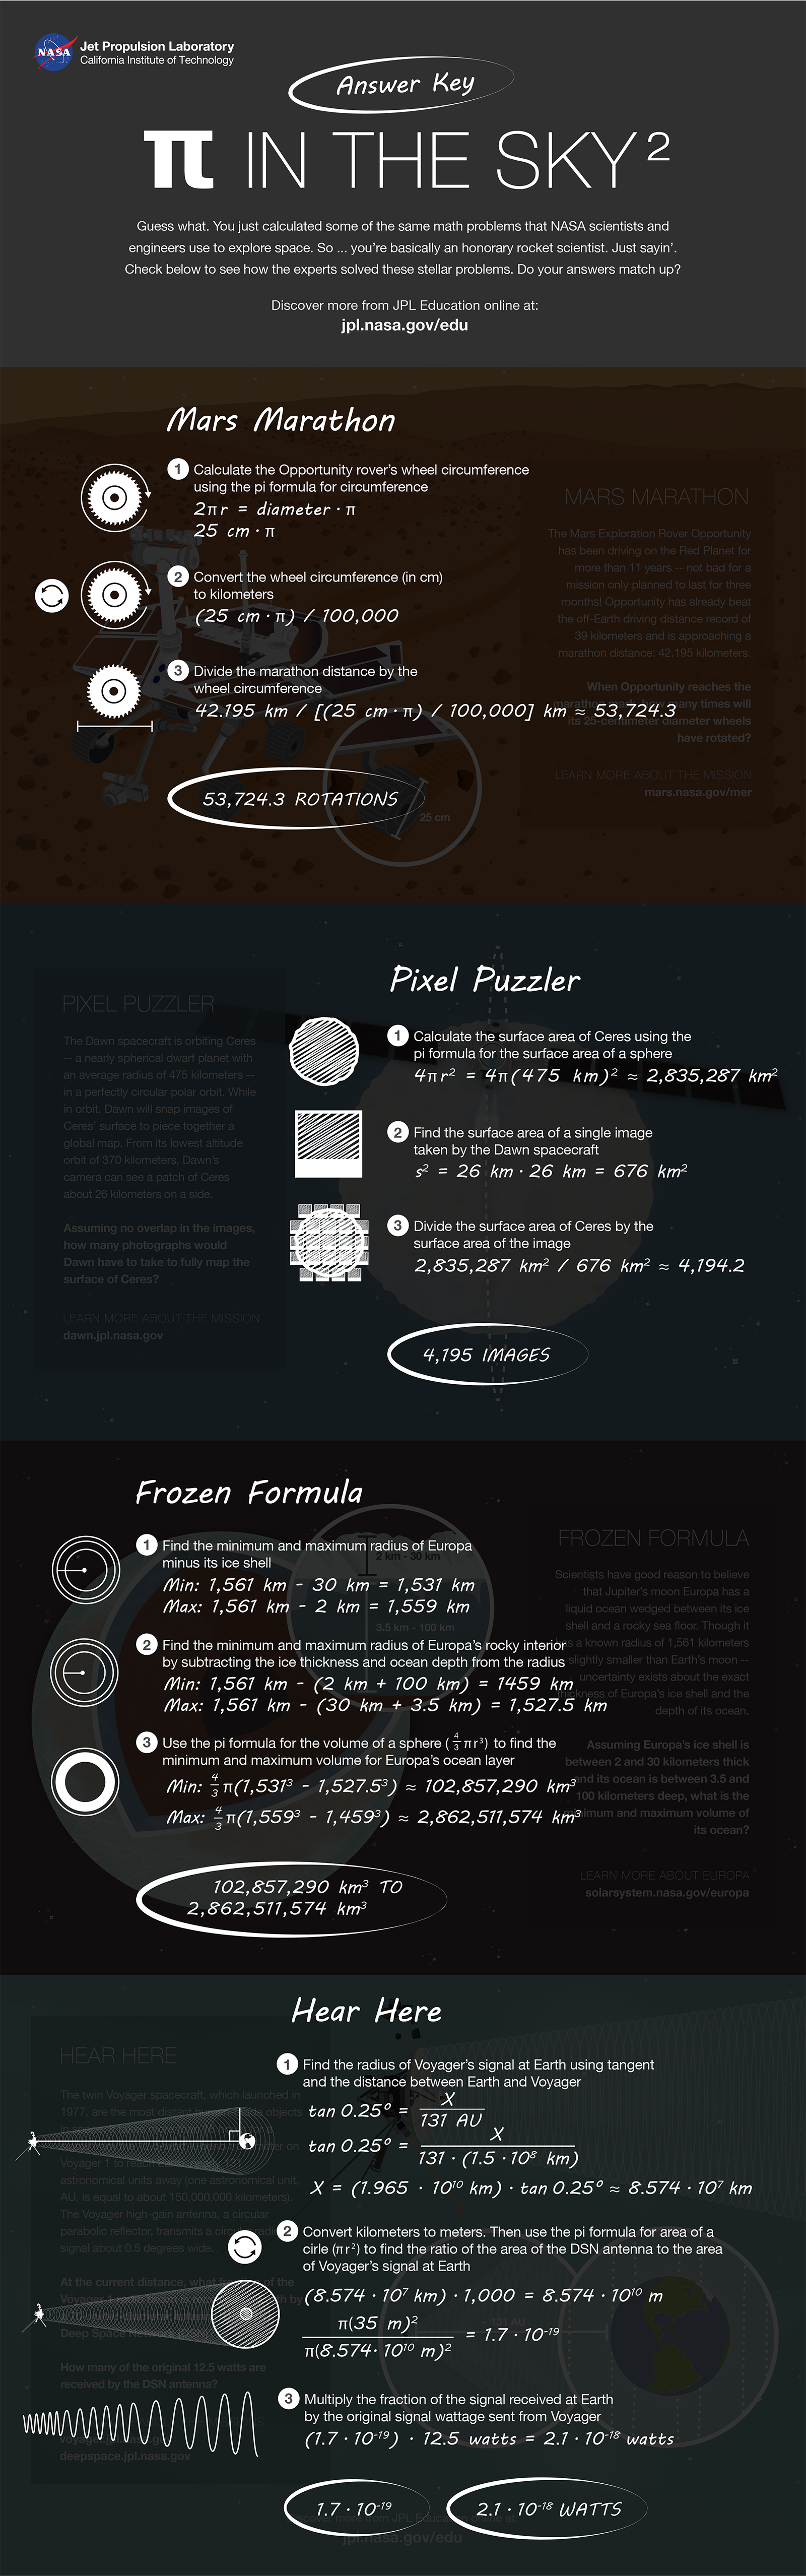 Pi in the Sky 2 Infographic Answers